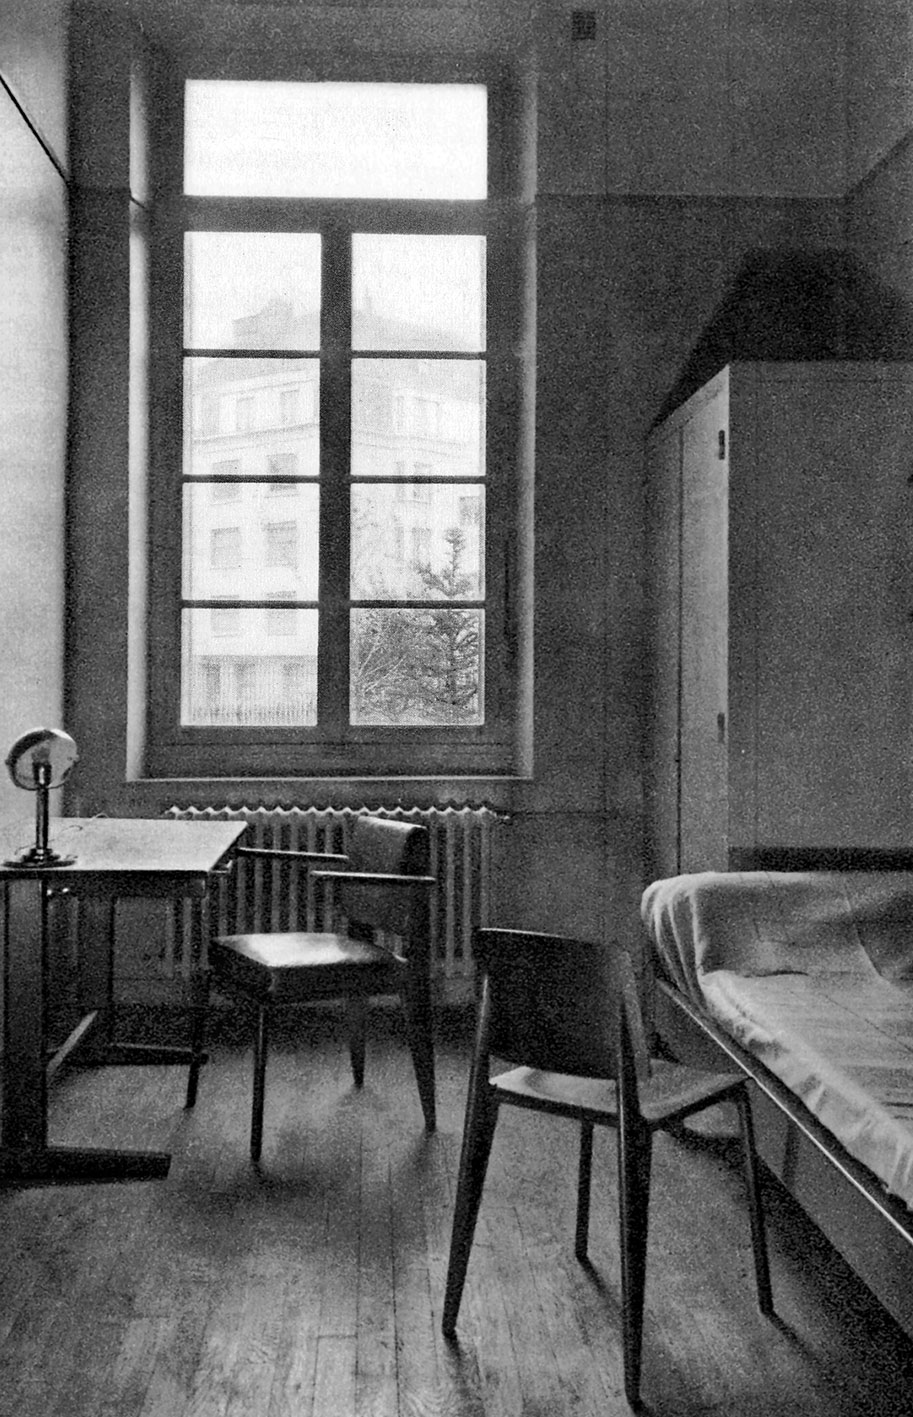 École Nationale Professionnelle, Metz, (architects R. Fournez and L. Sainsaulieu, 1935–1936). School teacher’s room with a CPDE office chair and a chair no. 4, a Cité table and a day-bed.